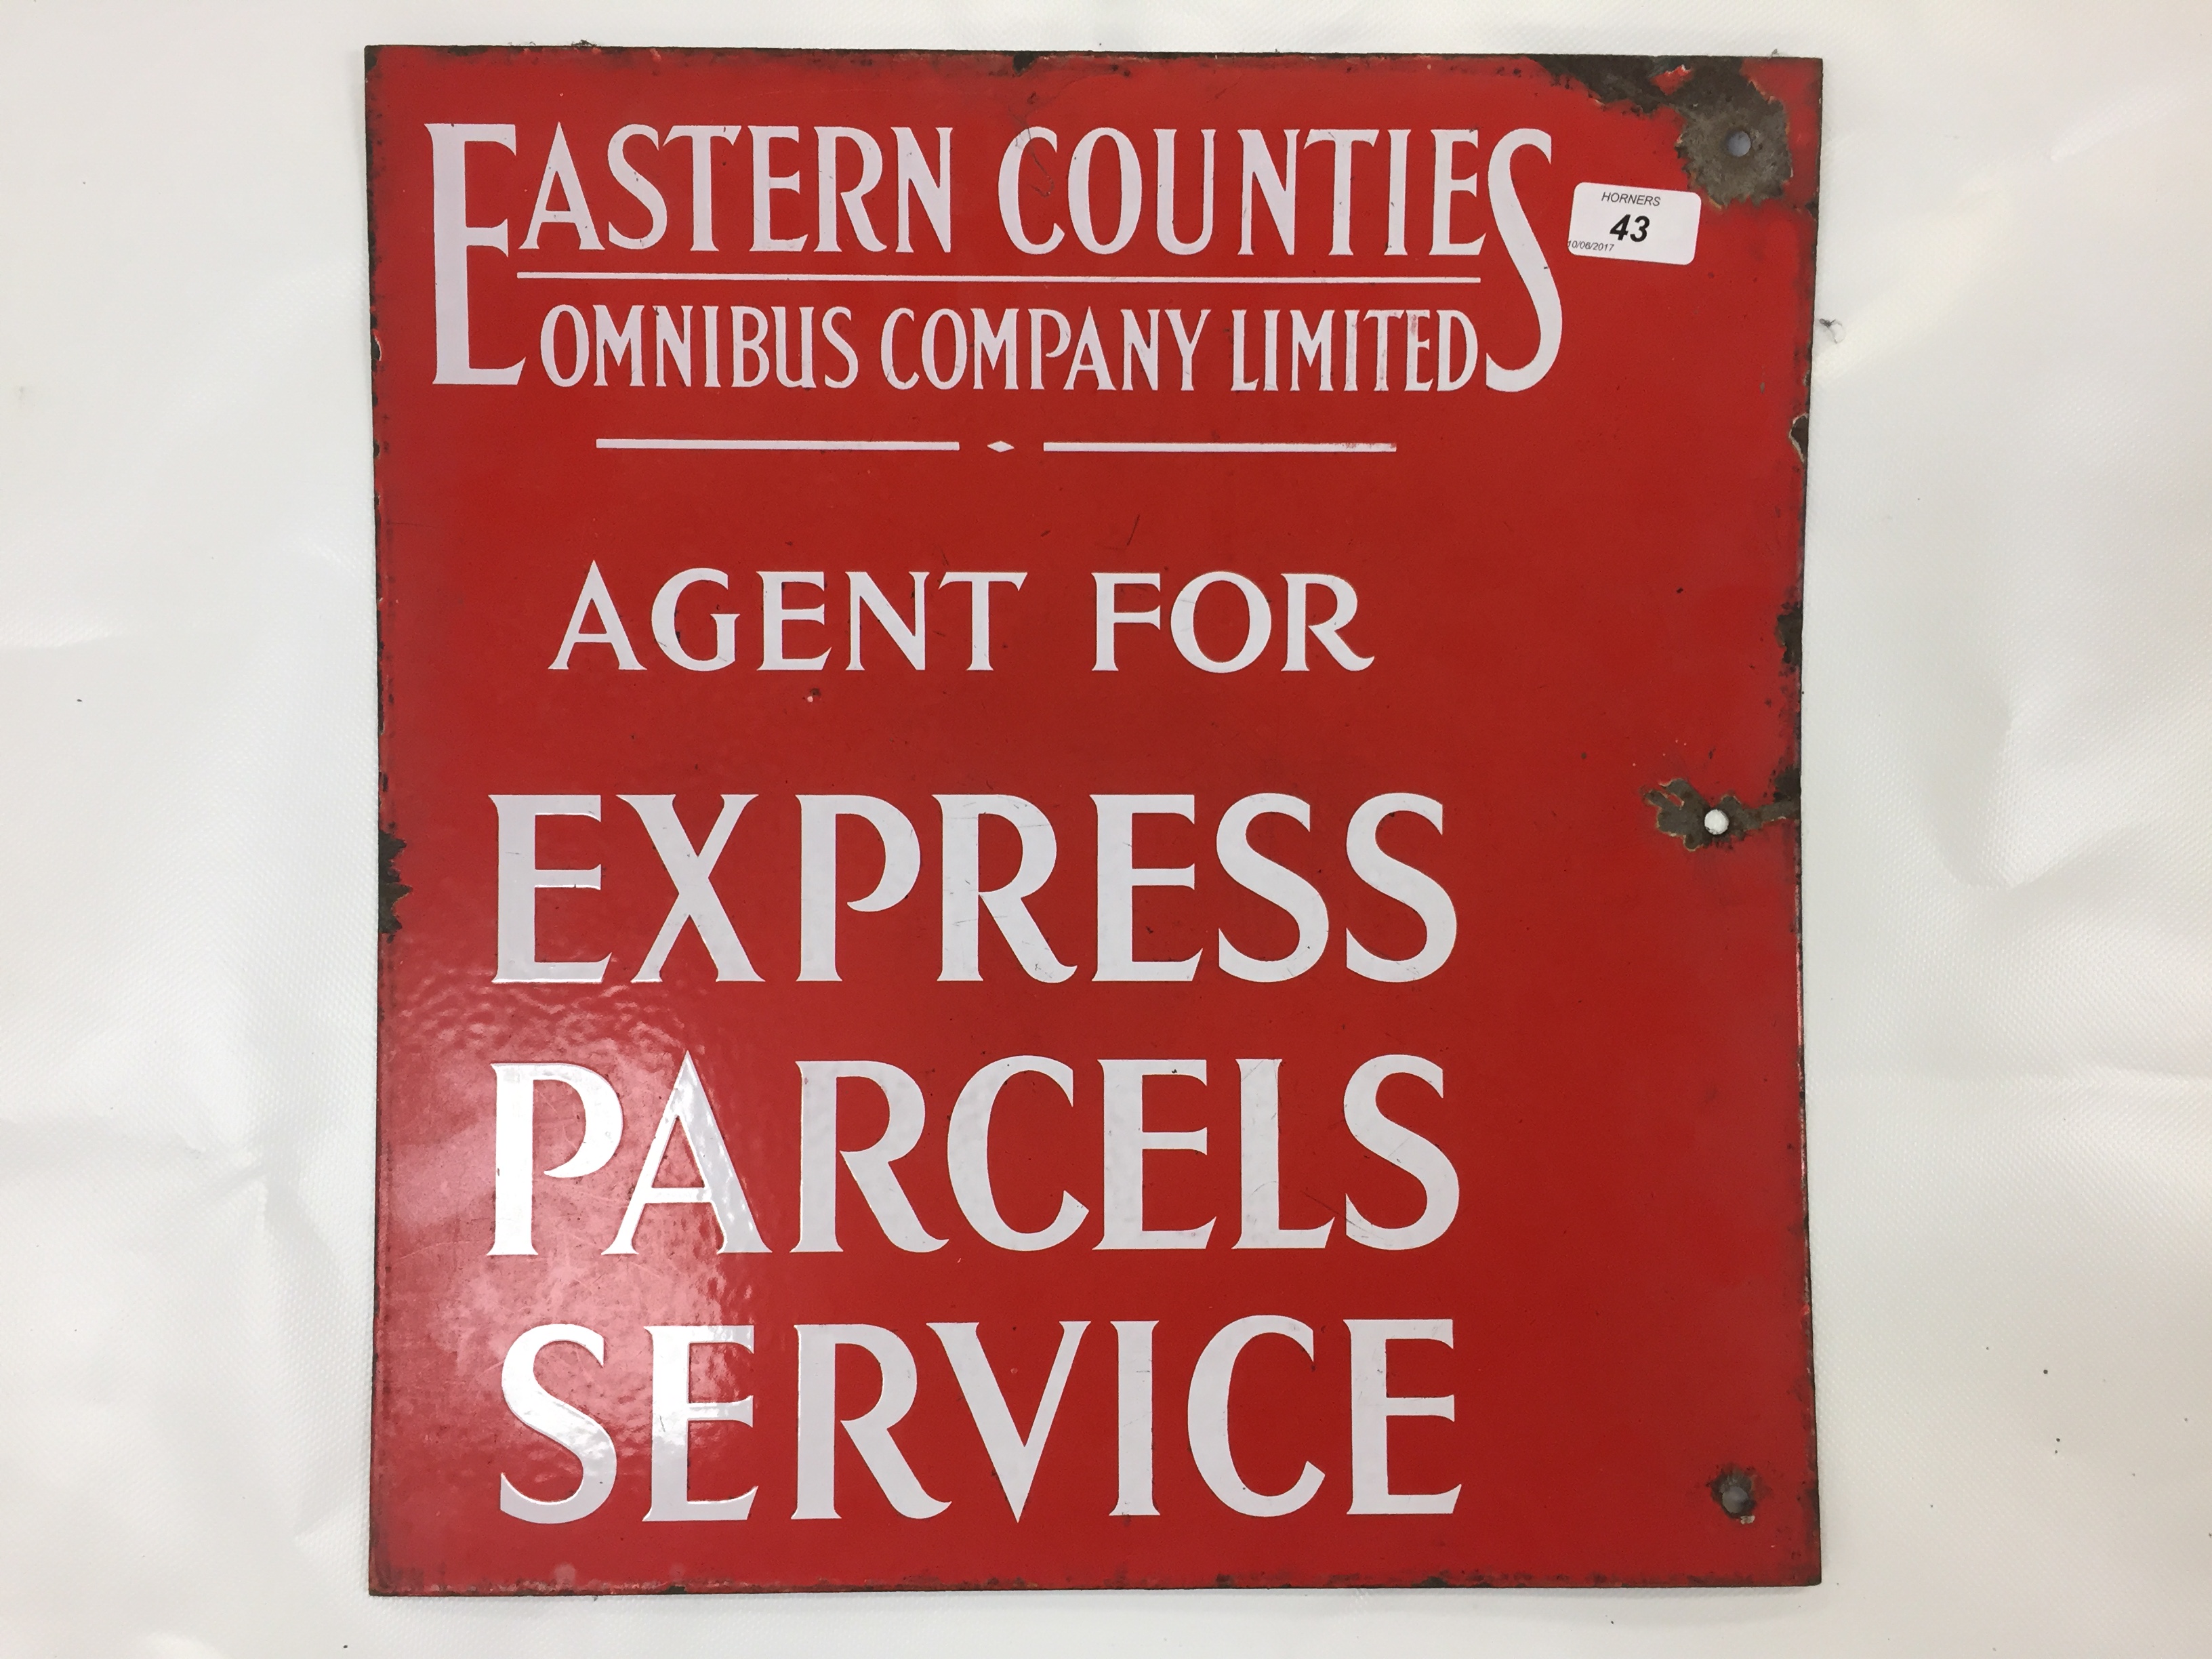 ENAMEL ADVERTISING SIGN - EASTERN COUNTIES OMNIBUS COMPANY LIMITED,